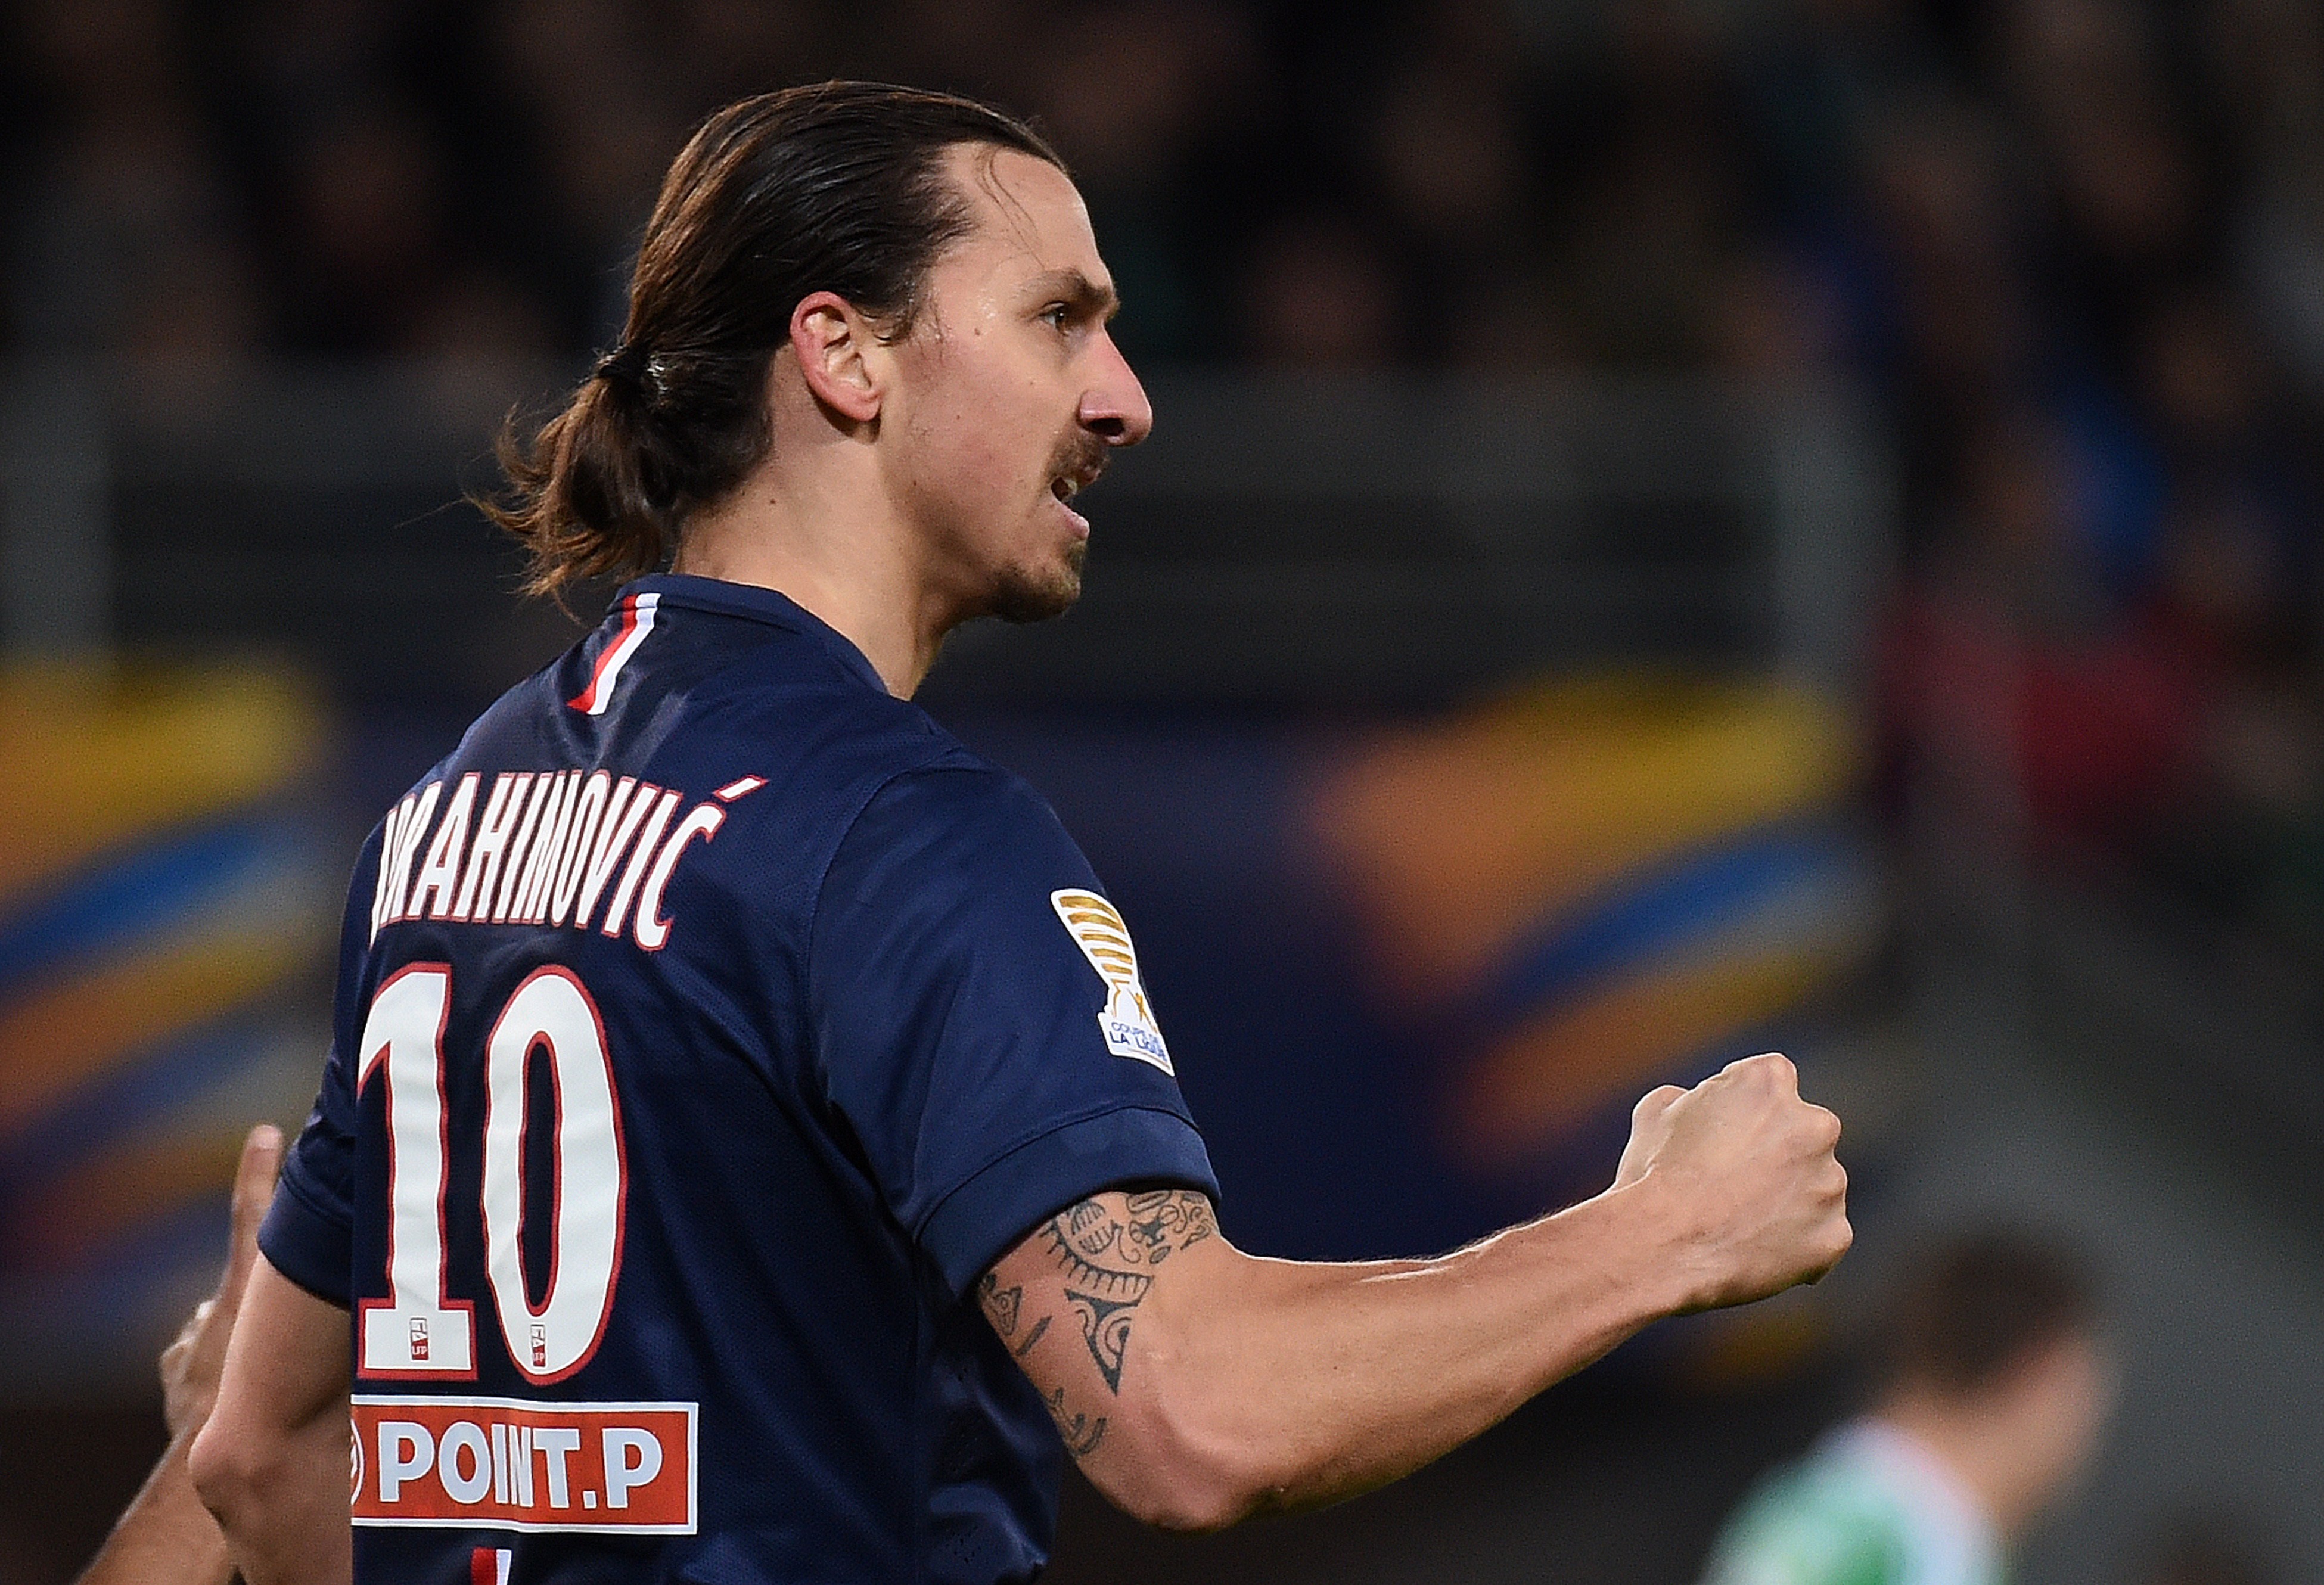 Ibrahimovic Nose Offside  Top Pictures Gallery